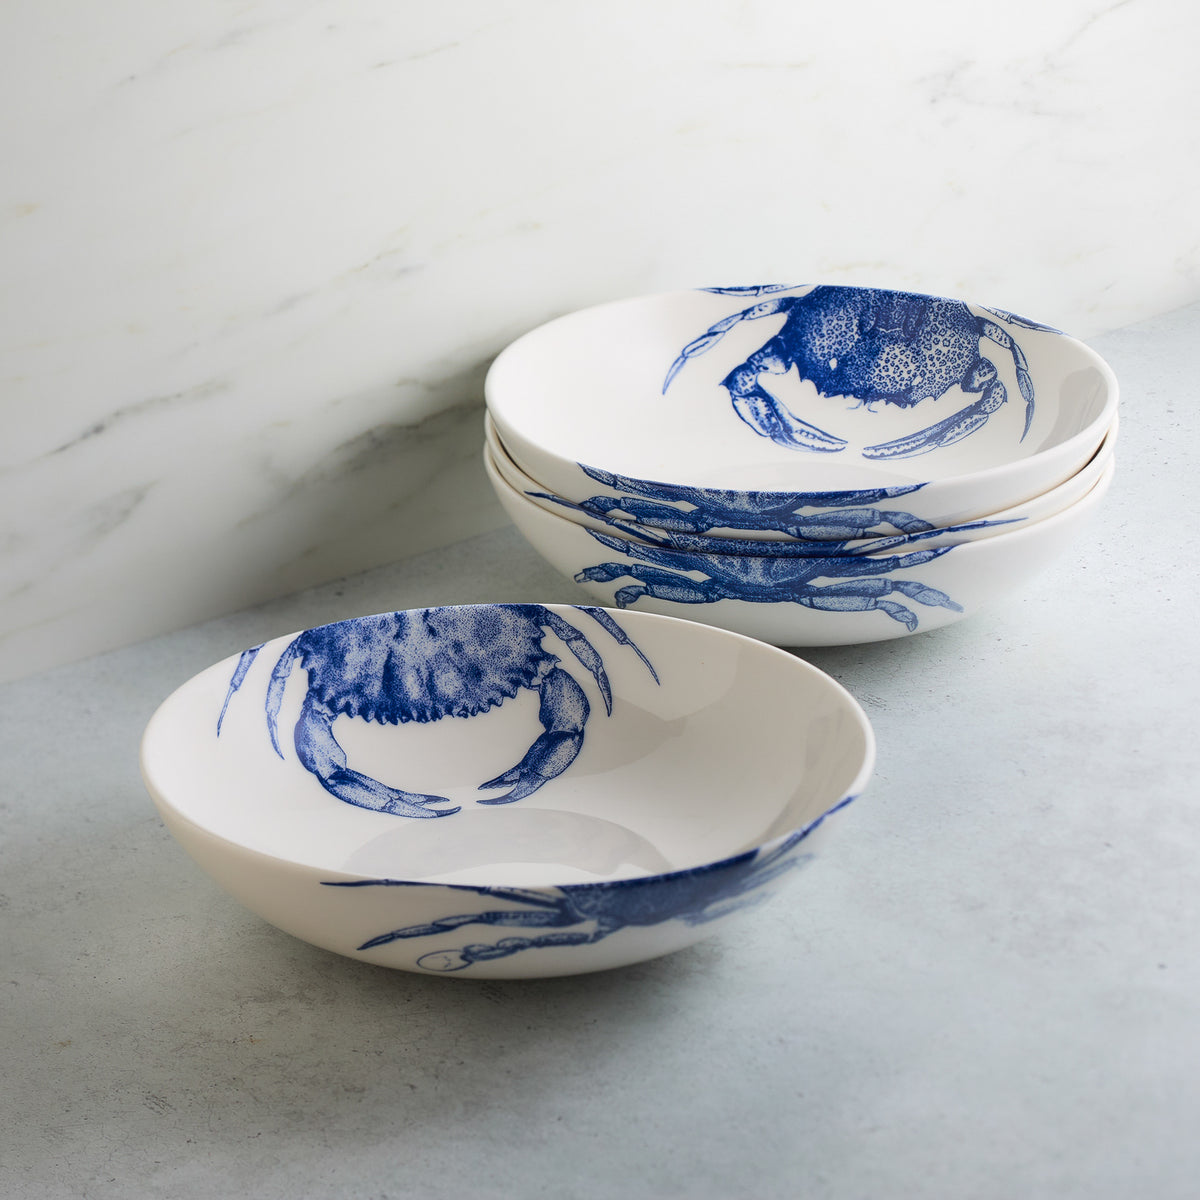 Four white ceramic bowls, each with a blue crab pattern, stacked next to a single identical bowl on a light grey surface. These Crab Entrée Bowls by Caskata Artisanal Home are high-fired porcelain and are dishwasher and microwave safe.